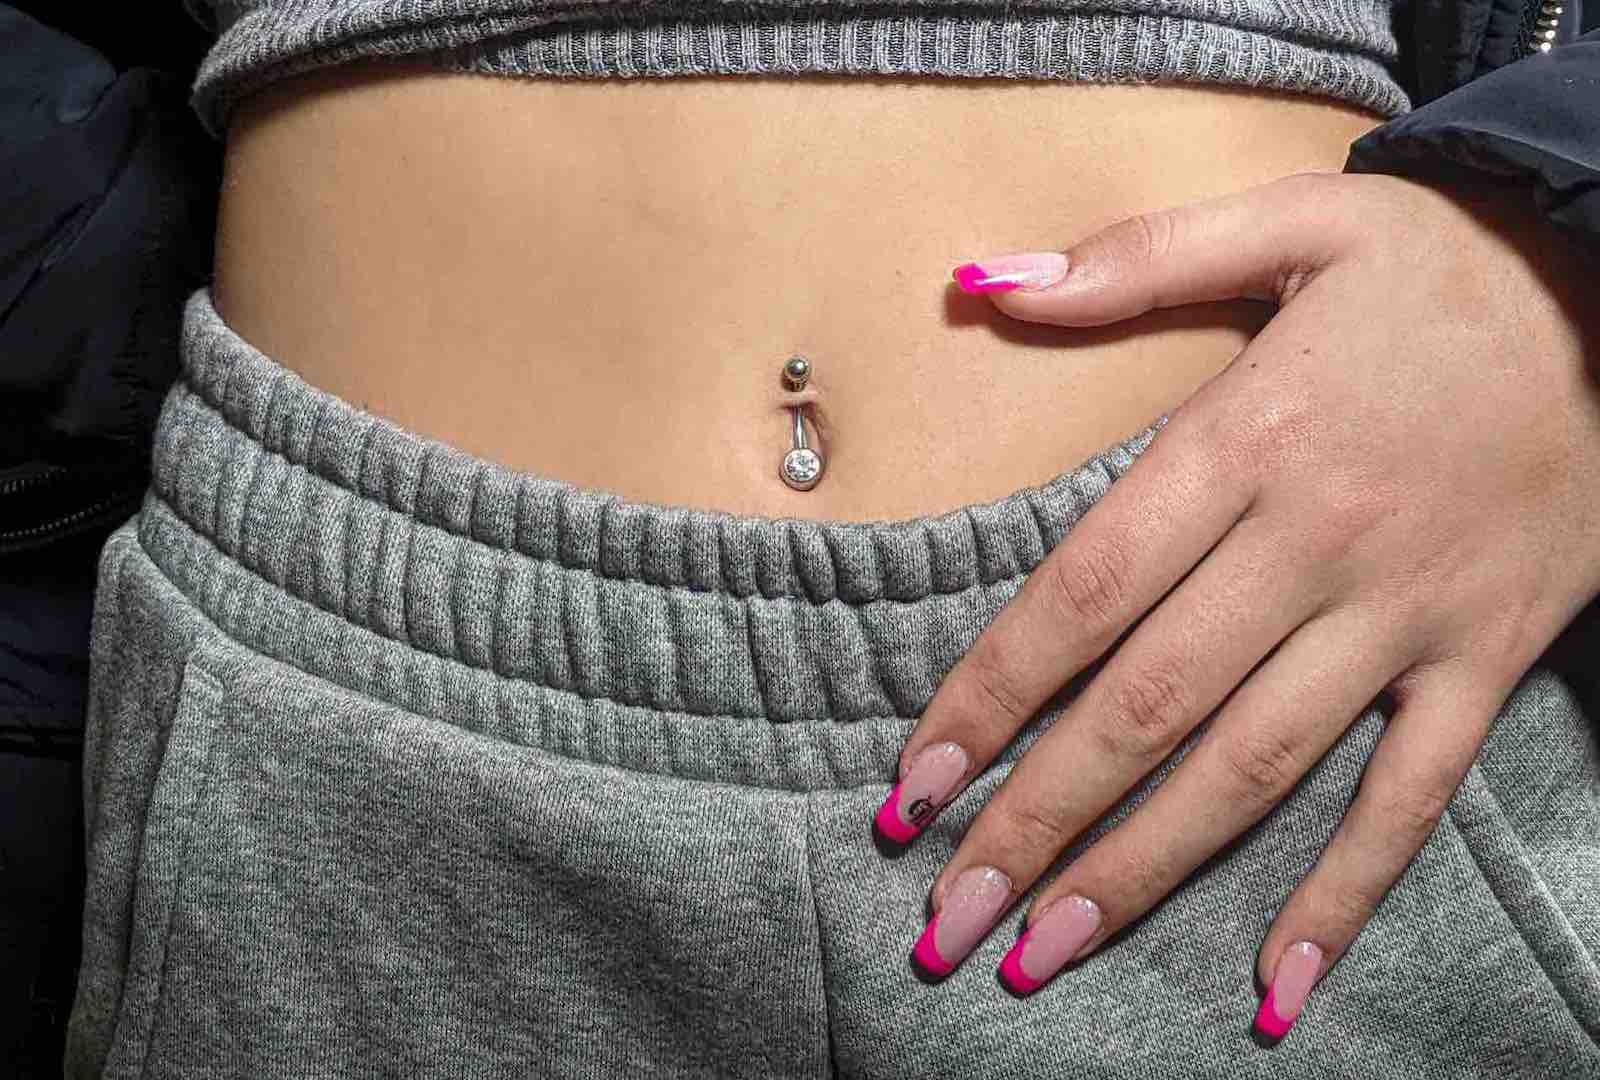 What Does Belly Button Piercing Mean Sexually?